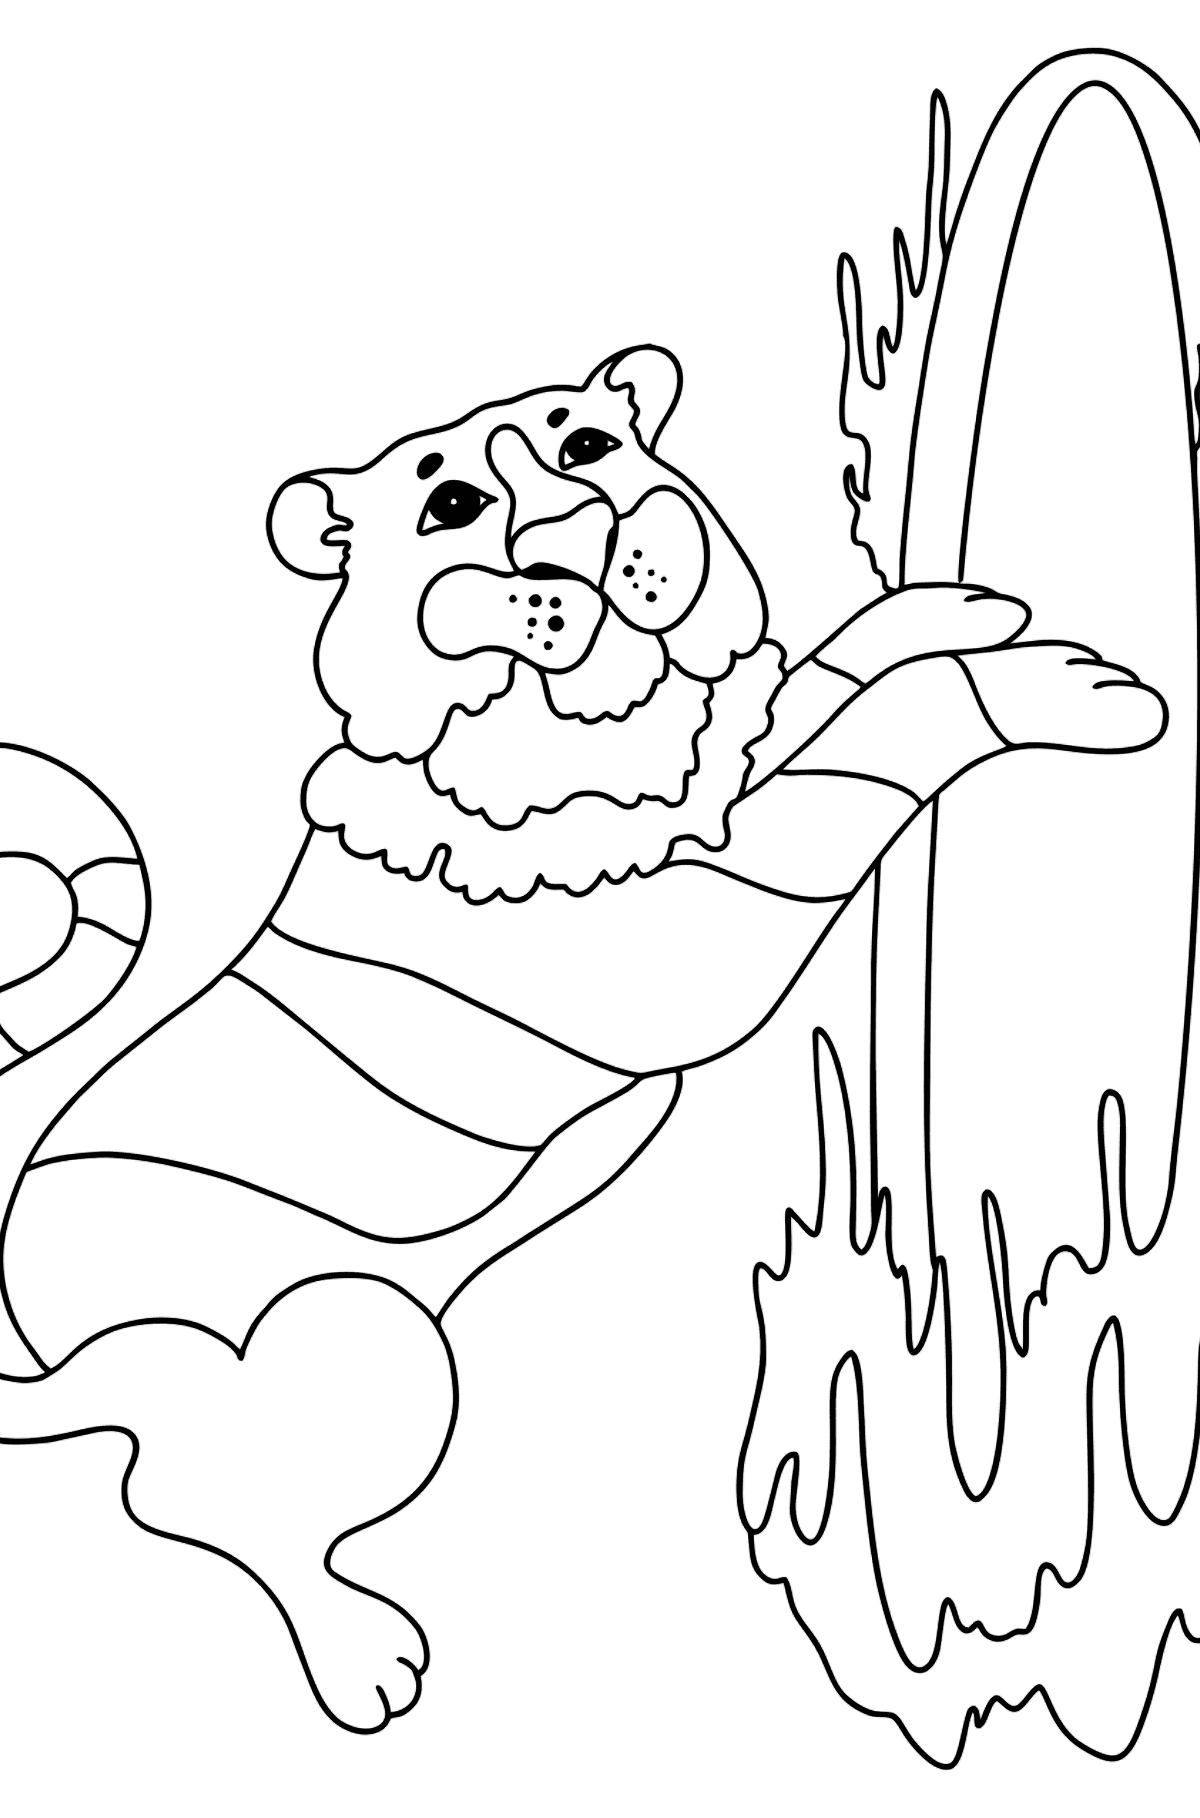 Coloring Page - A Tiger is Jumping Through Fire in a Circus - Coloring Pages for Kids